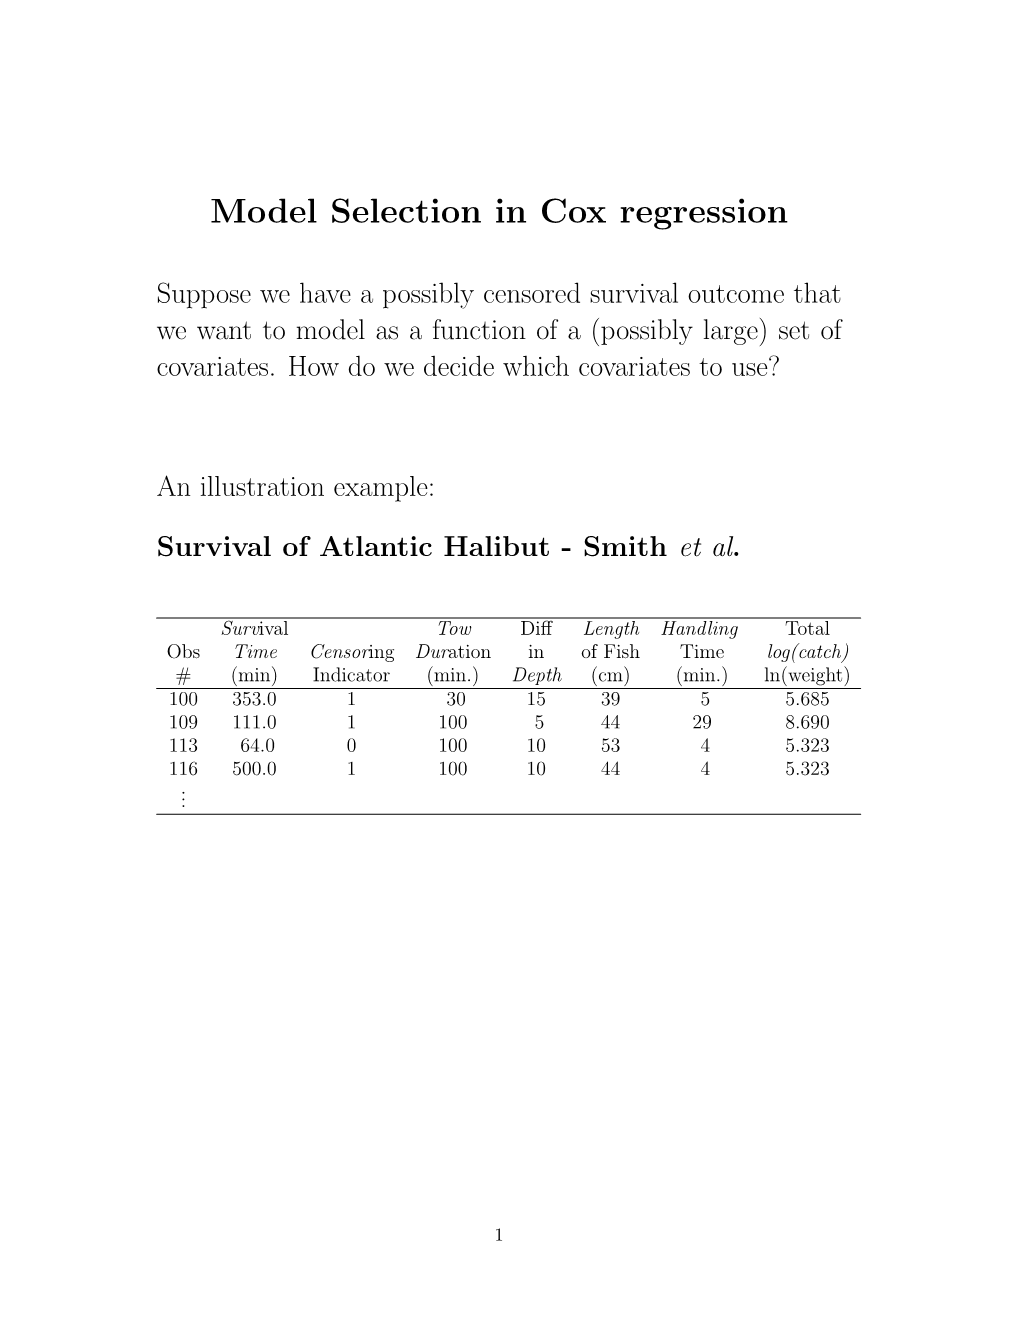 Model Selection in Cox Regression